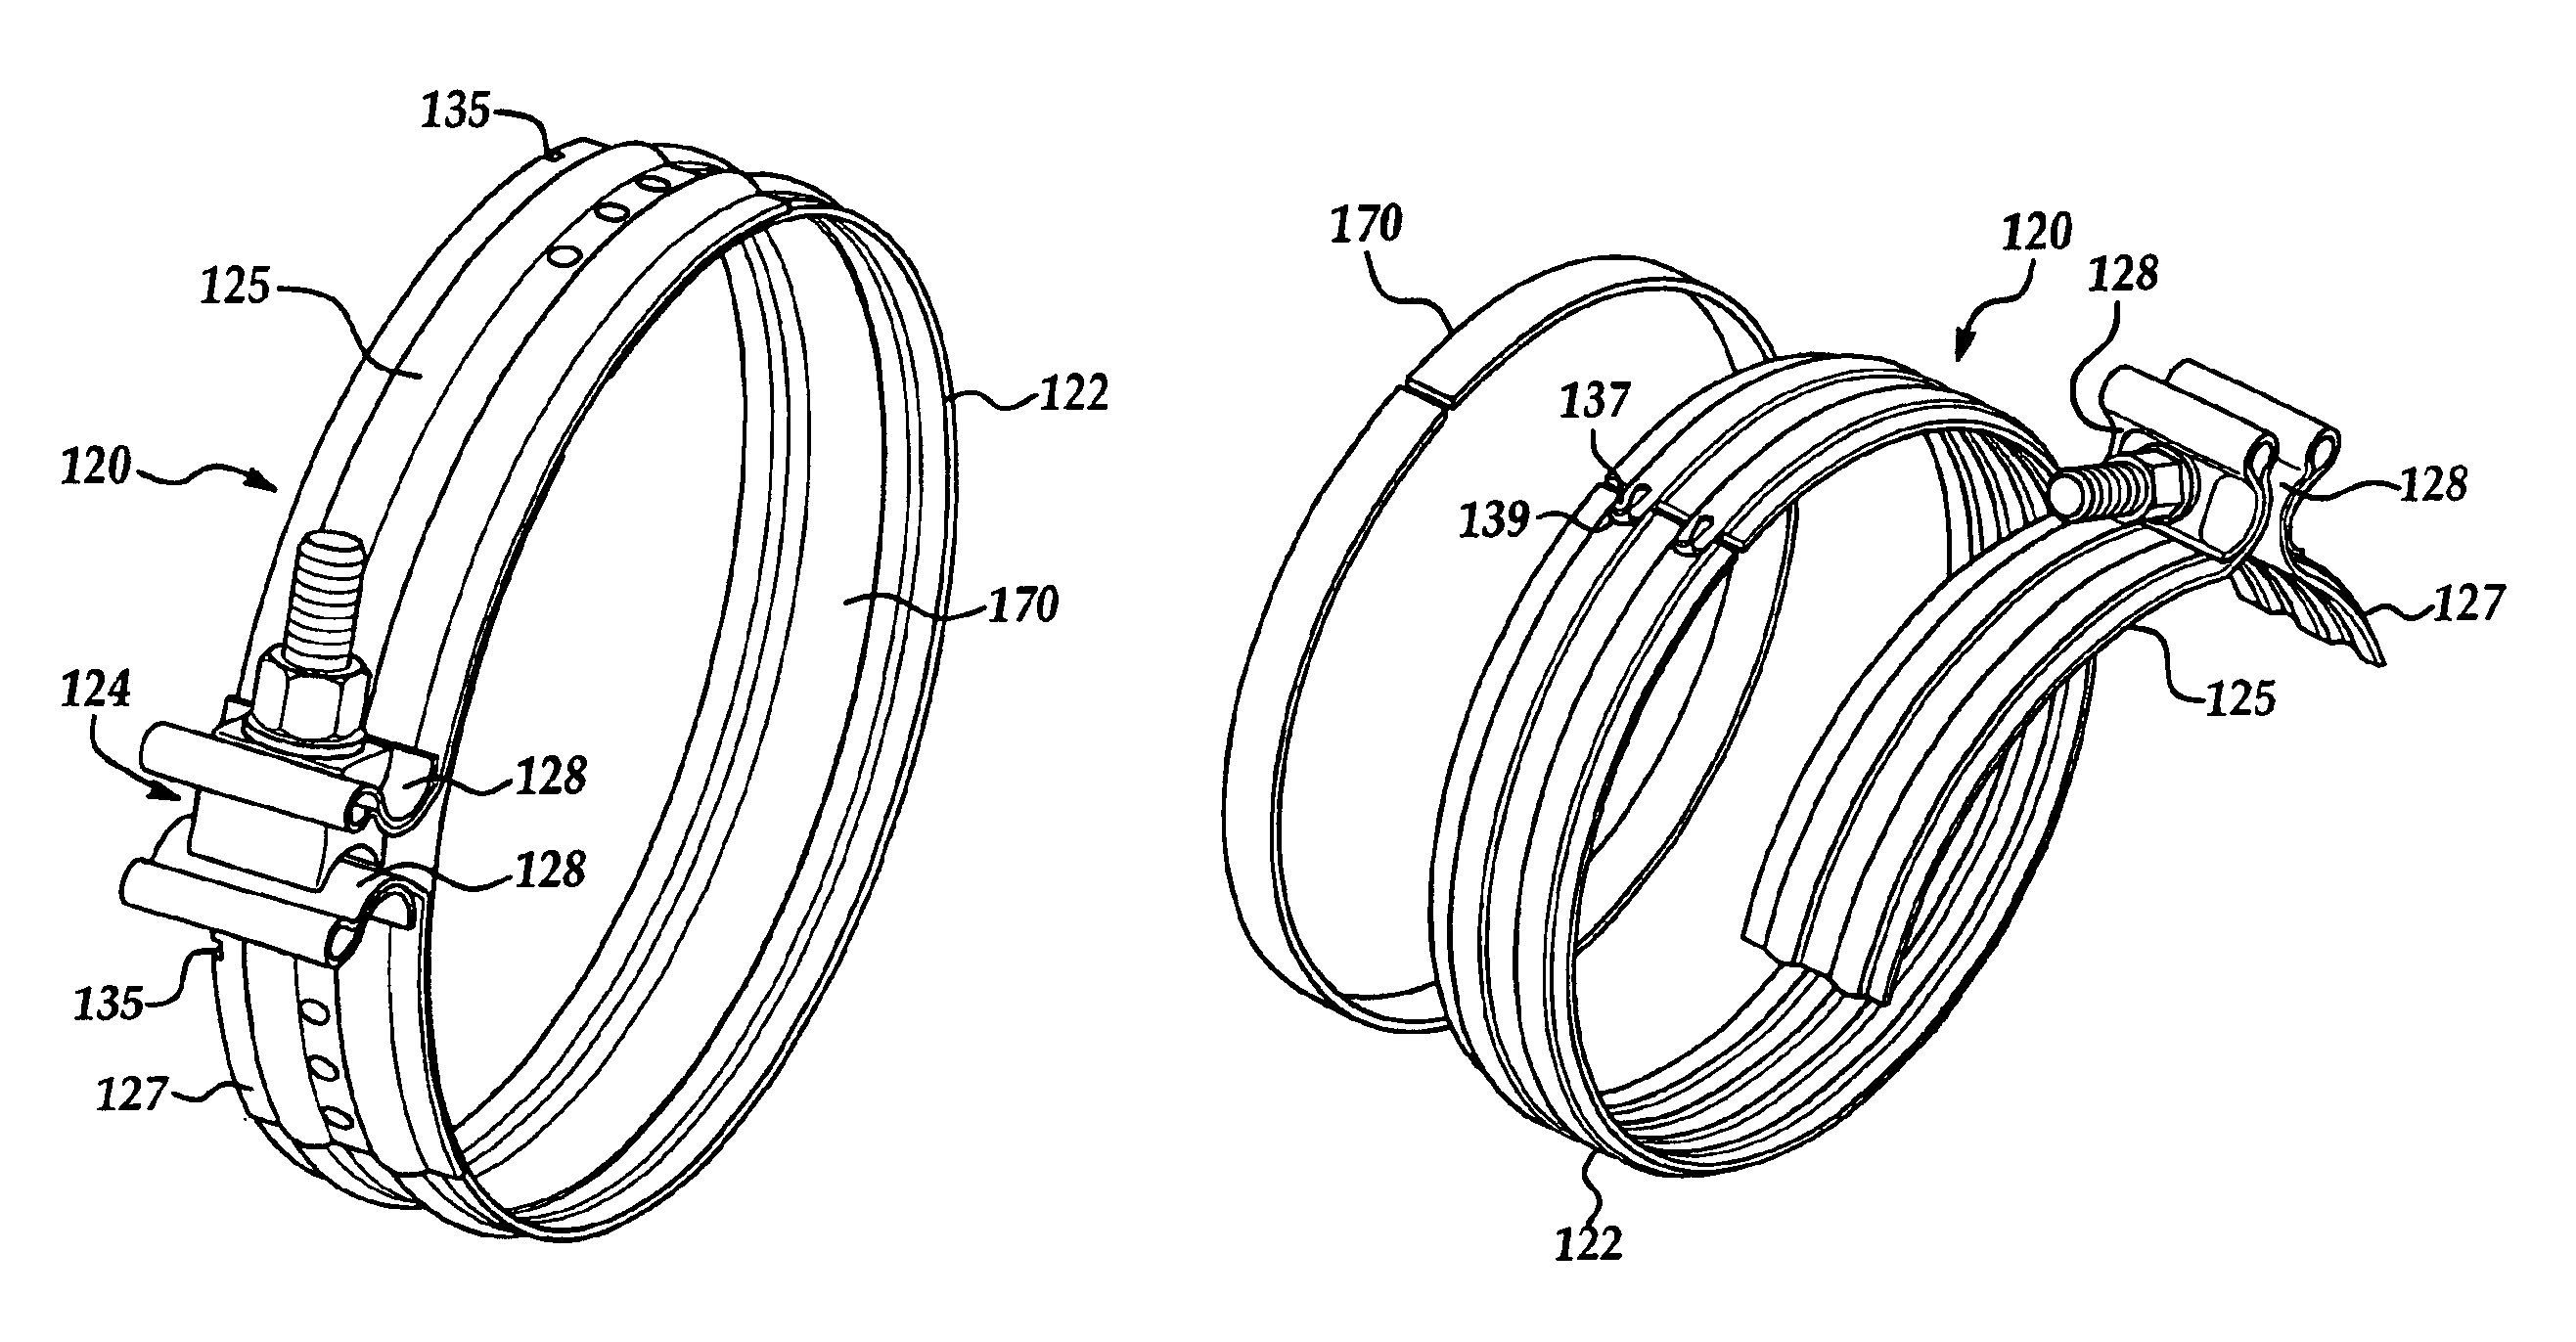 Clamp for joining tubular bodies